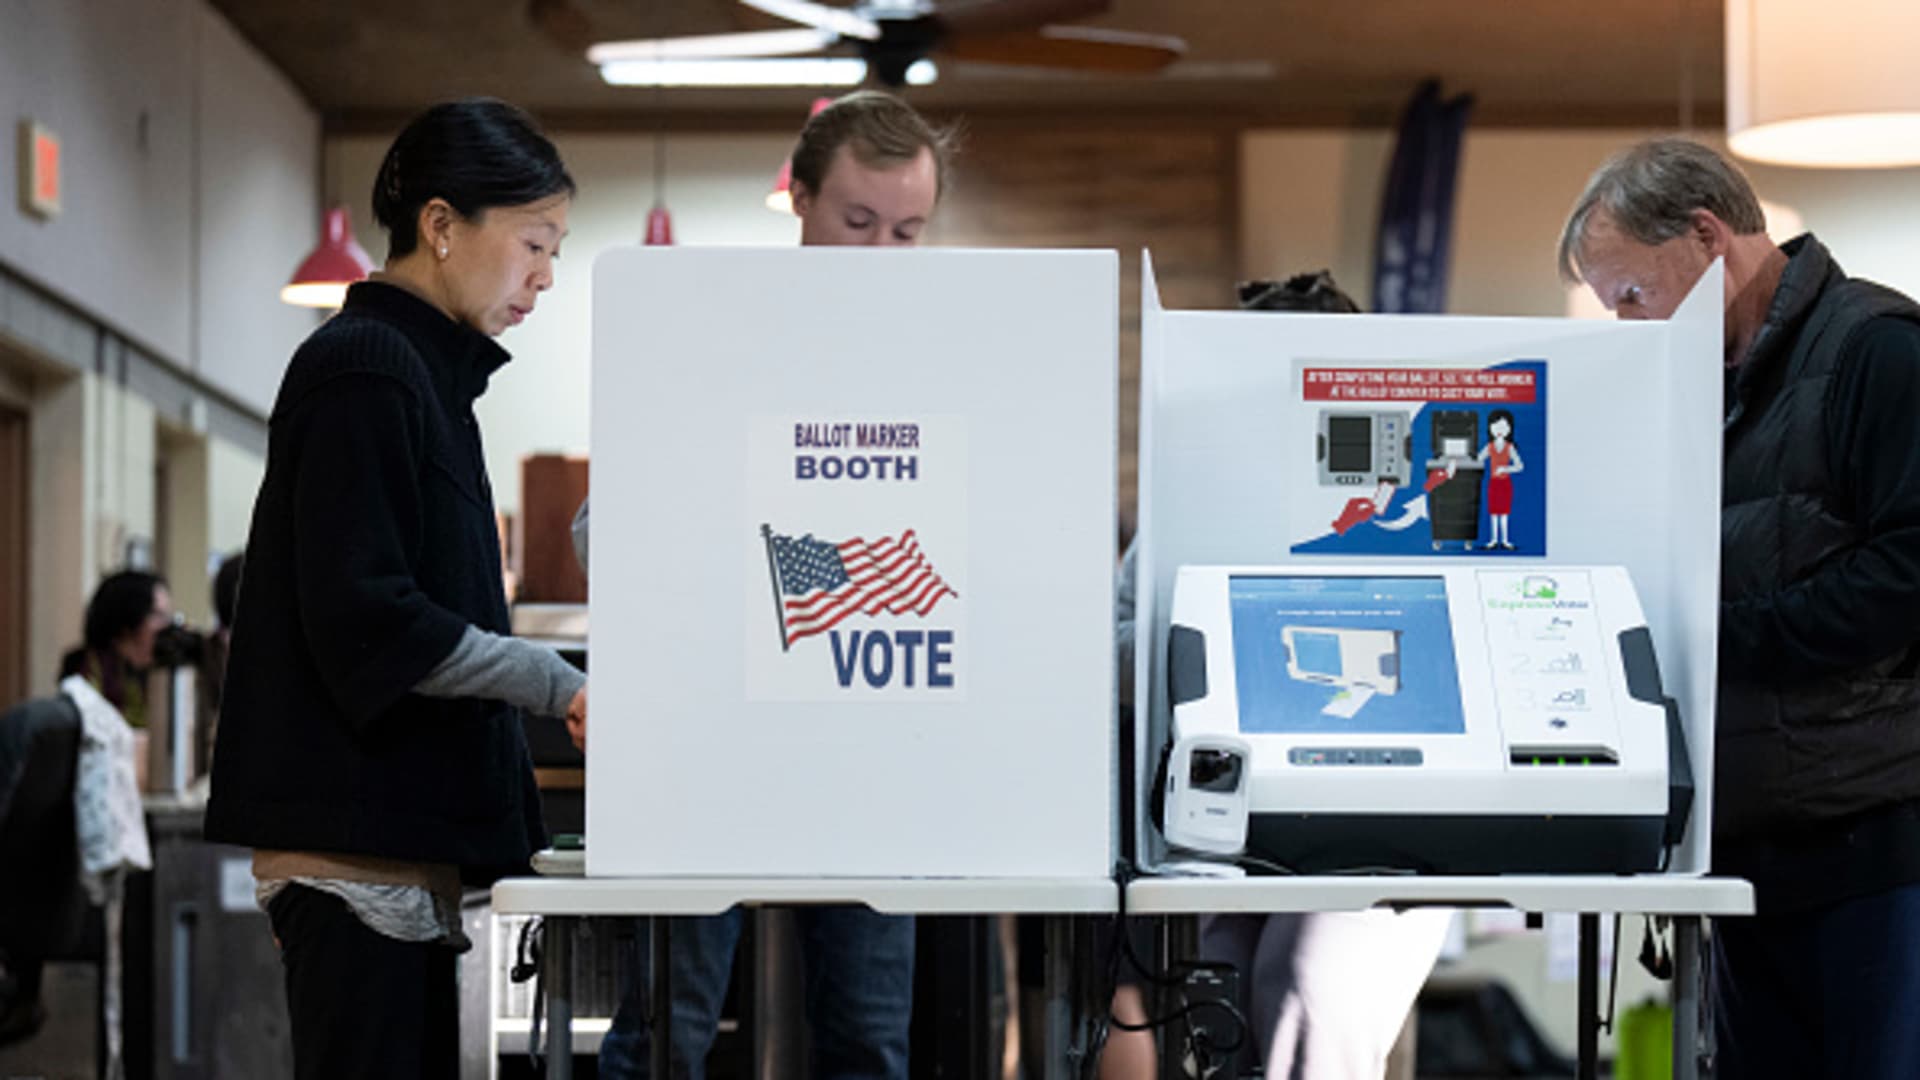 People vote at a polling location at Indianola Church of Christ on Election Day on November 8, 2022 in Columbus, Ohio.